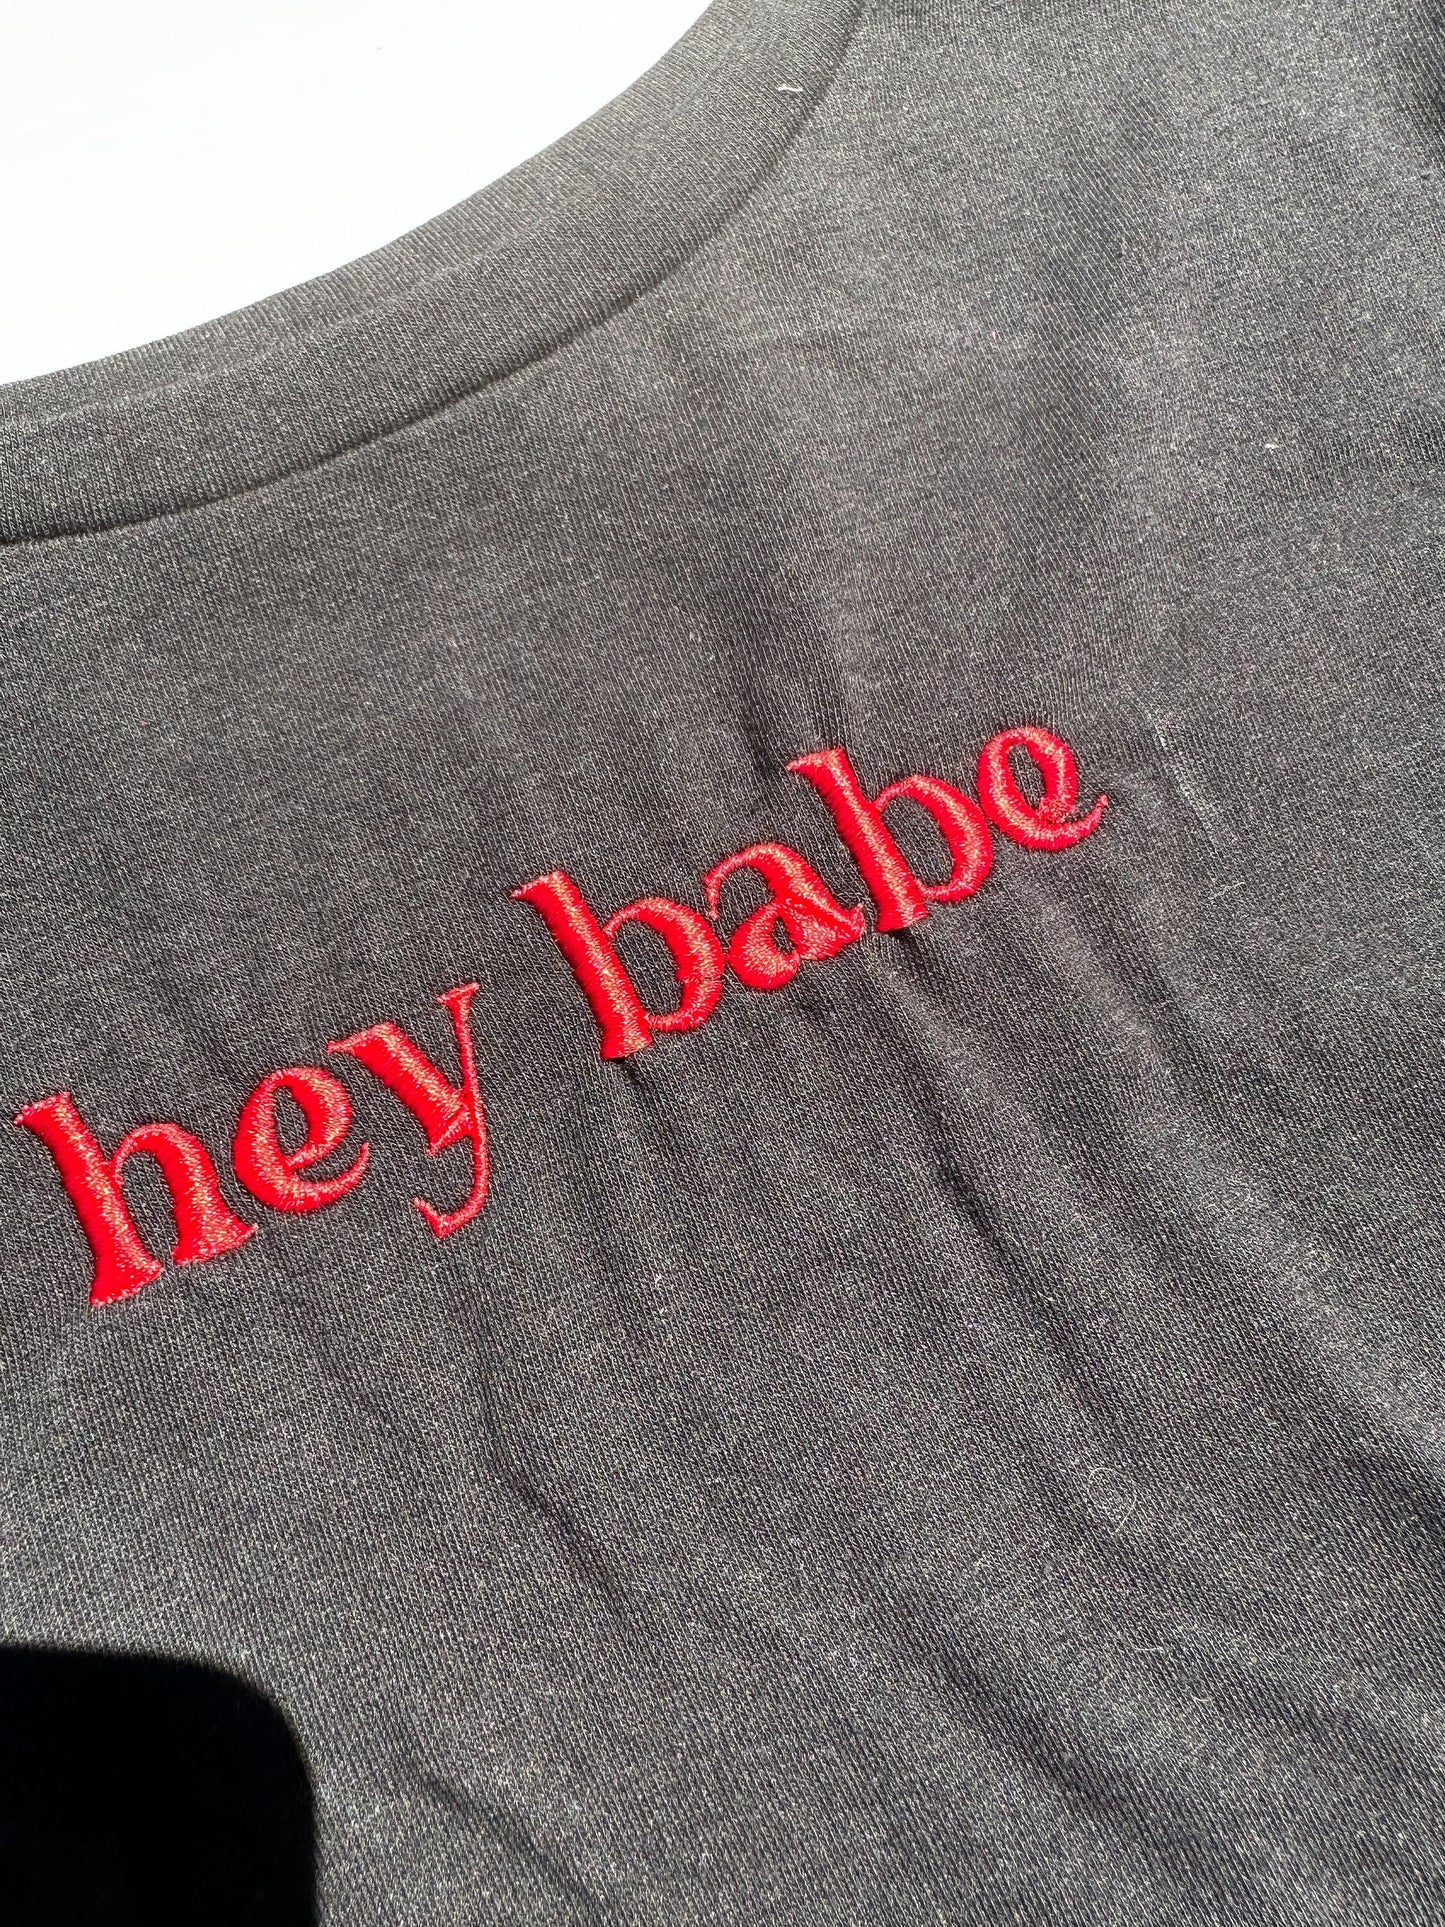 Hey babe - Written All Over Your Face || Louis Embroidered Crewneck, Sweatshirt, and Crop Top